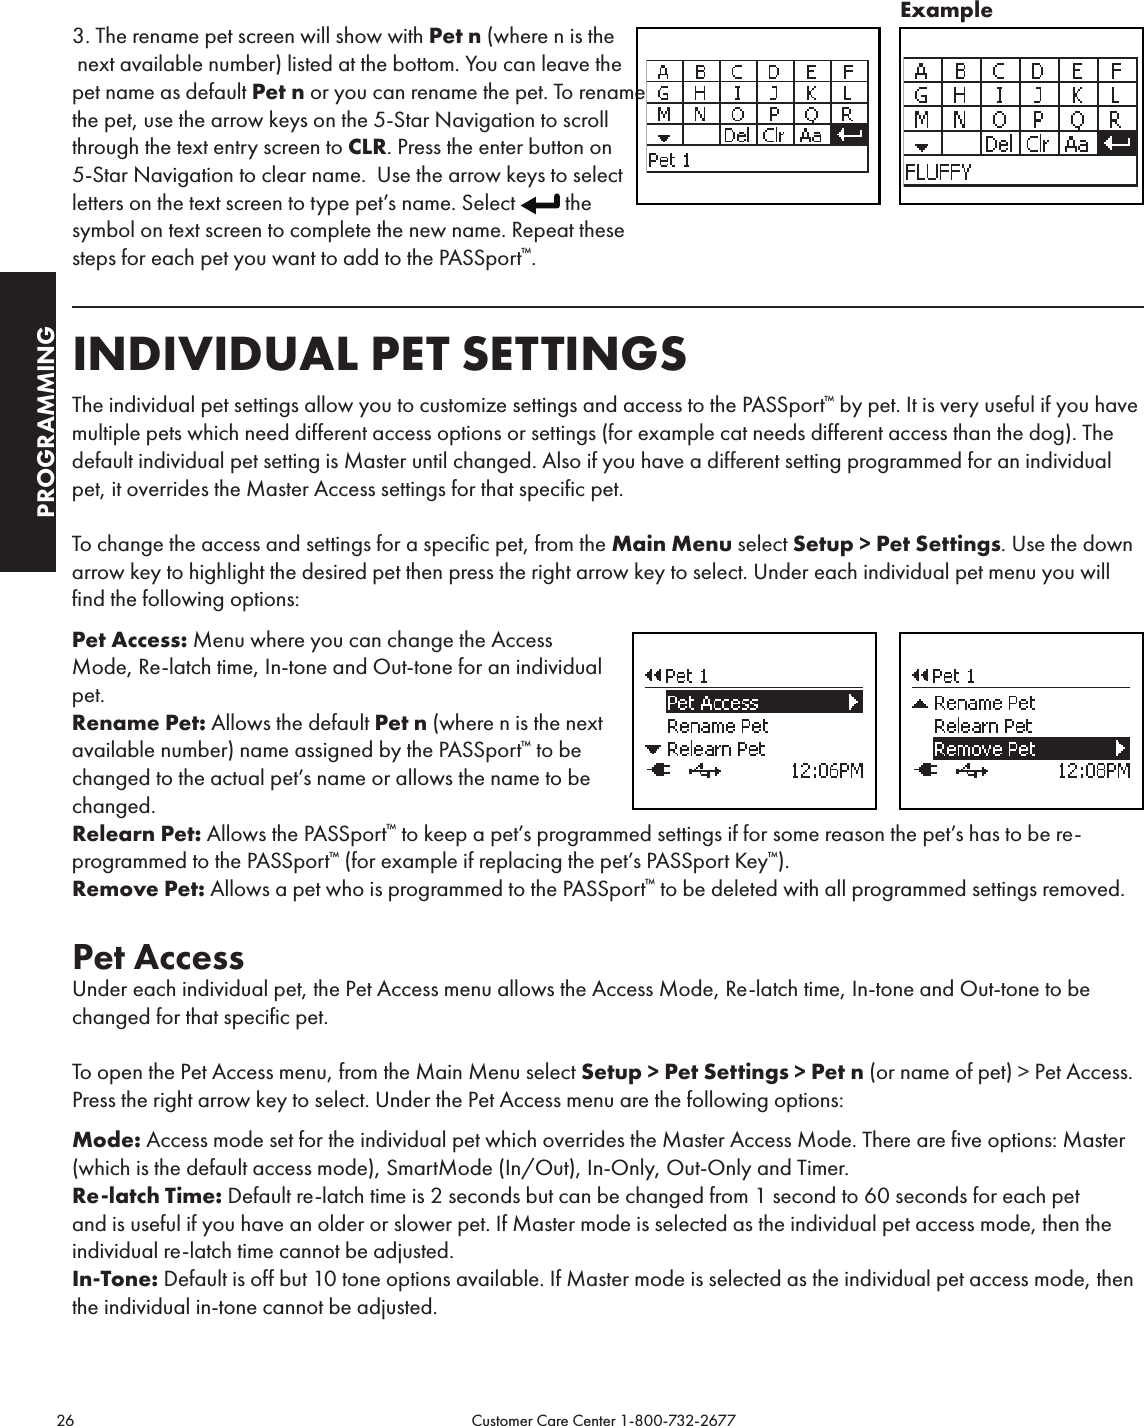 26                                                                                           Customer Care Center 1-800-732-2677PROGRAMMING3. The rename pet screen will show with Pet n (where n is the  next available number) listed at the bottom. You can leave the pet name as default Pet n or you can rename the pet. To rename the pet, use the arrow keys on the 5-Star Navigation to scroll through the text entry screen to CLR. Press the enter button on 5-Star Navigation to clear name.  Use the arrow keys to select letters on the text screen to type pet’s name. Select  the symbol on text screen to complete the new name. Repeat these steps for each pet you want to add to the PASSport™.INDIVIDUAL PET SETTINGSThe individual pet settings allow you to customize settings and access to the PASSport™ by pet. It is very useful if you have multiple pets which need different access options or settings (for example cat needs different access than the dog). The default individual pet setting is Master until changed. Also if you have a different setting programmed for an individual pet, it overrides the Master Access settings for that specific pet. To change the access and settings for a specific pet, from the Main Menu select Setup &gt; Pet Settings. Use the down arrow key to highlight the desired pet then press the right arrow key to select. Under each individual pet menu you will find the following options:Pet Access: Menu where you can change the Access  Mode, Re-latch time, In-tone and Out-tone for an individual  pet.Rename Pet: Allows the default Pet n (where n is the next  available number) name assigned by the PASSport™ to be changed to the actual pet’s name or allows the name to be changed.Relearn Pet: Allows the PASSport™ to keep a pet’s programmed settings if for some reason the pet’s has to be re-programmed to the PASSport™ (for example if replacing the pet’s PASSport Key™).Remove Pet: Allows a pet who is programmed to the PASSport™ to be deleted with all programmed settings removed.Pet AccessUnder each individual pet, the Pet Access menu allows the Access Mode, Re-latch time, In-tone and Out-tone to be changed for that specific pet.To open the Pet Access menu, from the Main Menu select Setup &gt; Pet Settings &gt; Pet n (or name of pet) &gt; Pet Access. Press the right arrow key to select. Under the Pet Access menu are the following options:Mode: Access mode set for the individual pet which overrides the Master Access Mode. There are five options: Master (which is the default access mode), SmartMode (In/Out), In-Only, Out-Only and Timer.Re-latch Time: Default re-latch time is 2 seconds but can be changed from 1 second to 60 seconds for each pet and is useful if you have an older or slower pet. If Master mode is selected as the individual pet access mode, then the individual re-latch time cannot be adjusted.In-Tone: Default is off but 10 tone options available. If Master mode is selected as the individual pet access mode, then the individual in-tone cannot be adjusted.Example